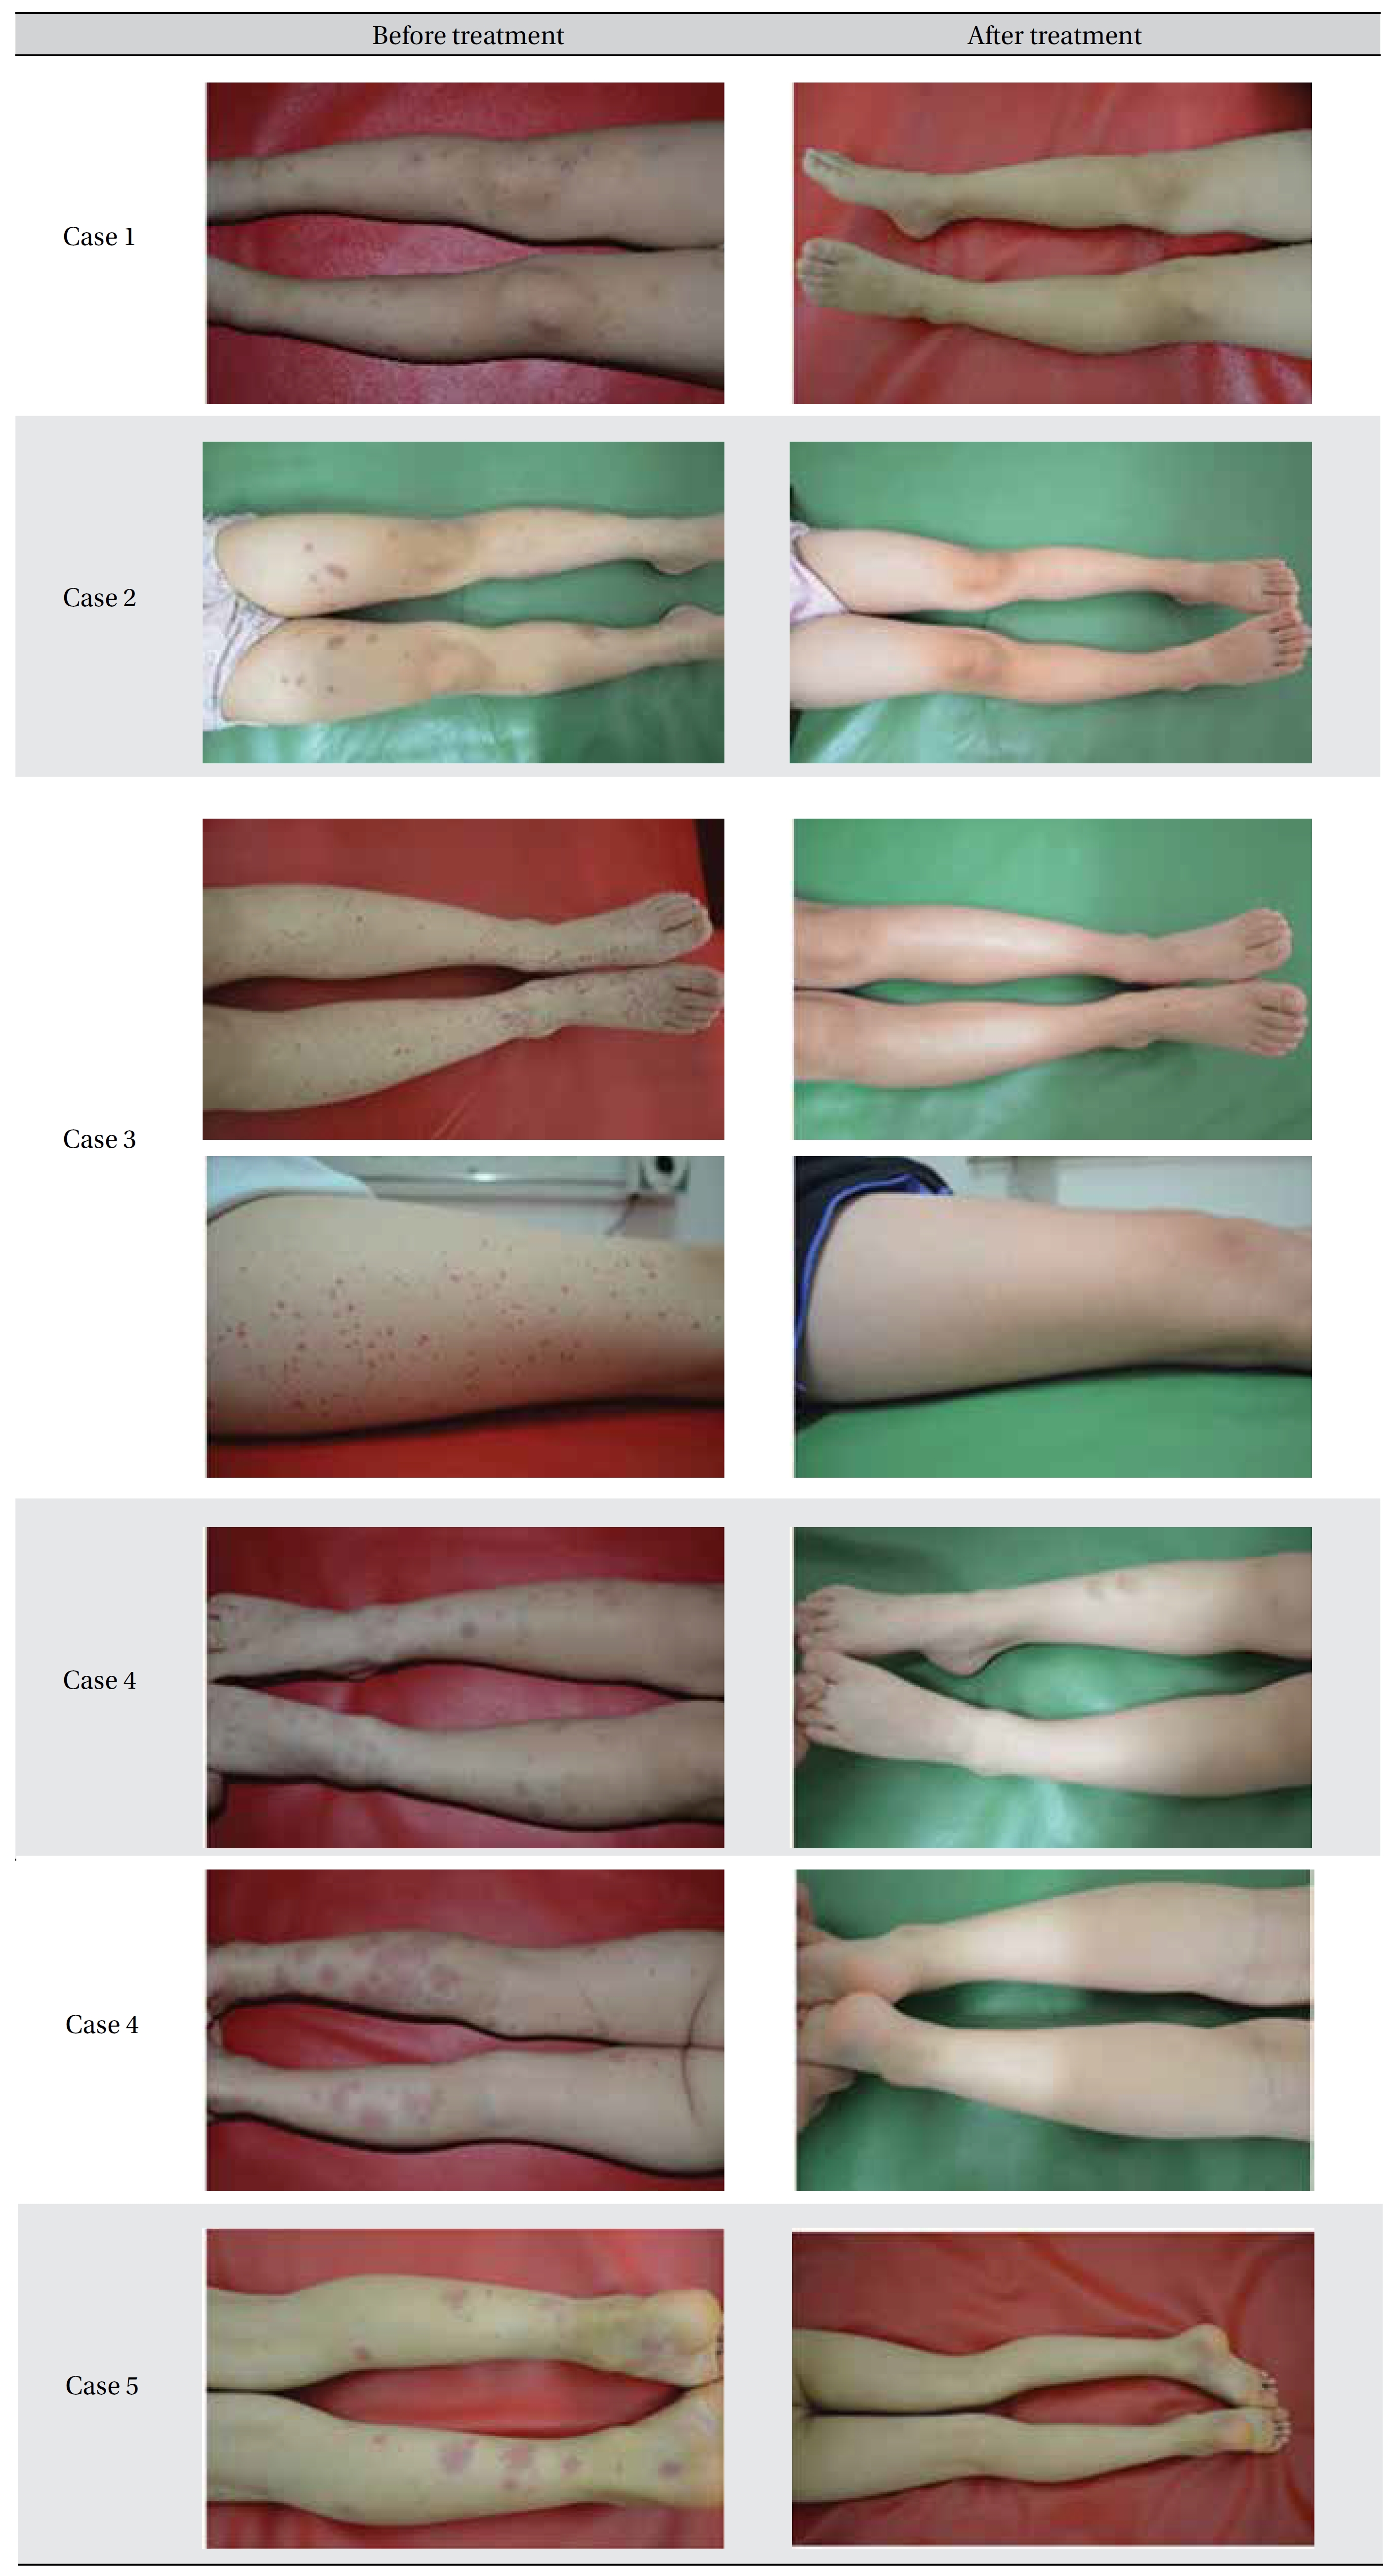 Images before and after treatment